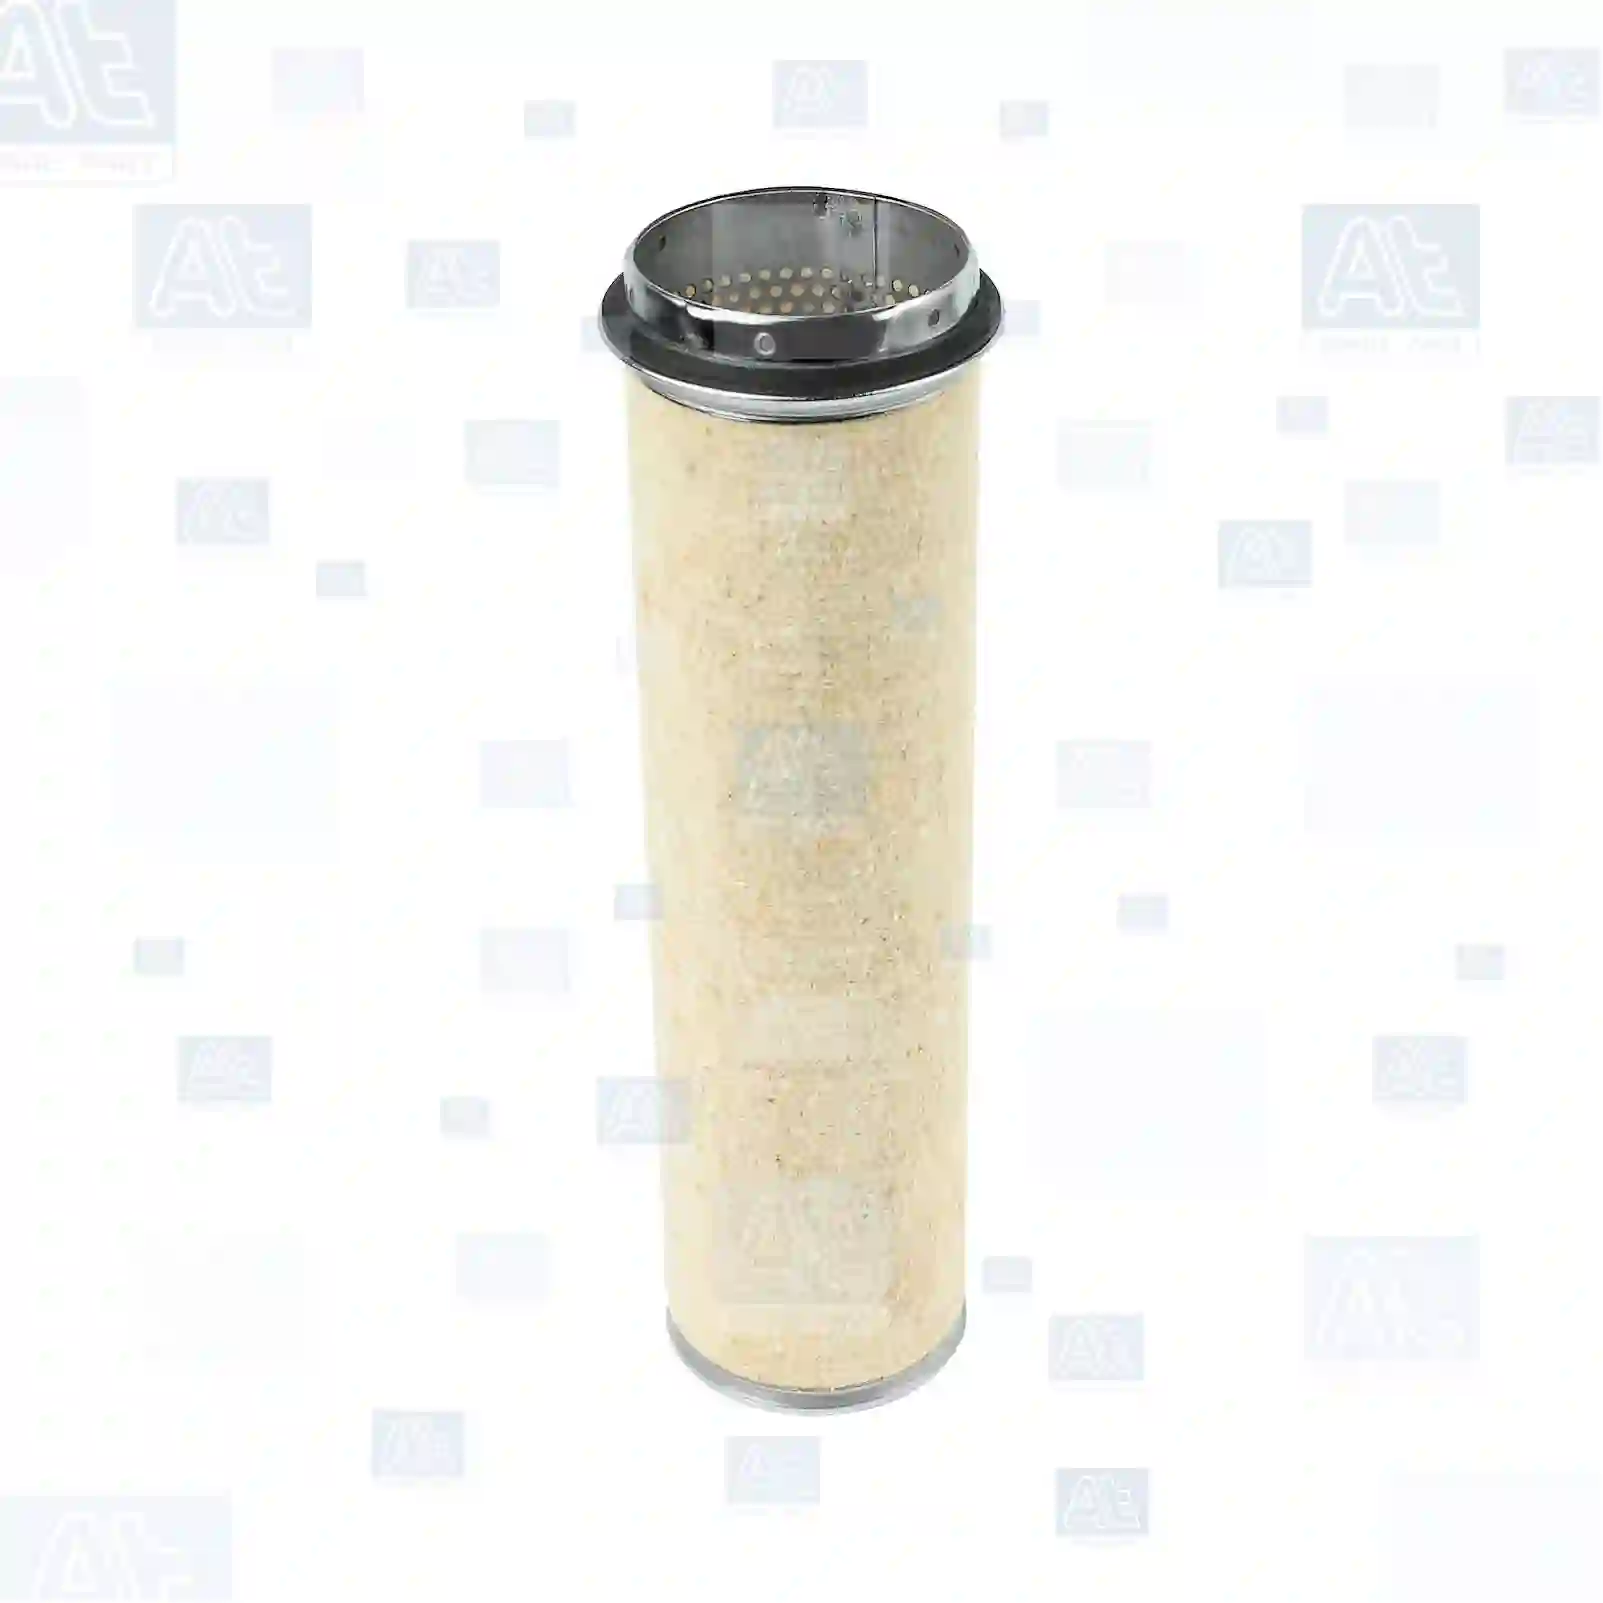 Air filter, inner, at no 77706170, oem no: 8009101117003, 905411510018, 161200190033, 3219421R1, 3219421R14, E155525, 61200190033, 0001761680, 0009400840, 0009420840, 0009420841, 0692380, 3679754, 692380, 13106374, 988595, 98859500, 01902131, 02241329, 1212302023600, 606901670115, 8121918027400, 760884, 1212302023600, 8121918027400, 0746712, 1470630, 4134367, F184230090100, 9839020, 00467138, 01902131, 02241329, 75247063, Y05782010, 467138, 94613437, 0009839020, 3219421R1, 1-3002B182-0, 00760884, 01902131, 02241329, 41AJ58185, AZ30758, PE10011907, 34000490, 02241329, 1212302023600, 8121918027400, 510653508, 7360733, 2191P776695, 04532555149, 62000190702, 81083040085, 81084050012, 0020943204, 3440947304, 3450947004, 605412970057, 606901670115, 3219421R14, 161200190033, 3219421R1, 760884, 93219421R1, 850545, F0850541, F0850545, F850541, F850545, 5000802477, 5000802977, 6005019715, 7701021498, R940S, 161200190033, 162000190702, 61200190033, 62000190702, 3679754, 802704, 80270400, 110337796640, 11110149, 111101499, 3338478, 1103377797, 11033779, 110337796640, 110337797, 11110149, 111101499, 6642047, 6644958, 66449885, 6645833, 2RD129620A, T2D129620A, T2D129620B, 931354 At Spare Part | Engine, Accelerator Pedal, Camshaft, Connecting Rod, Crankcase, Crankshaft, Cylinder Head, Engine Suspension Mountings, Exhaust Manifold, Exhaust Gas Recirculation, Filter Kits, Flywheel Housing, General Overhaul Kits, Engine, Intake Manifold, Oil Cleaner, Oil Cooler, Oil Filter, Oil Pump, Oil Sump, Piston & Liner, Sensor & Switch, Timing Case, Turbocharger, Cooling System, Belt Tensioner, Coolant Filter, Coolant Pipe, Corrosion Prevention Agent, Drive, Expansion Tank, Fan, Intercooler, Monitors & Gauges, Radiator, Thermostat, V-Belt / Timing belt, Water Pump, Fuel System, Electronical Injector Unit, Feed Pump, Fuel Filter, cpl., Fuel Gauge Sender,  Fuel Line, Fuel Pump, Fuel Tank, Injection Line Kit, Injection Pump, Exhaust System, Clutch & Pedal, Gearbox, Propeller Shaft, Axles, Brake System, Hubs & Wheels, Suspension, Leaf Spring, Universal Parts / Accessories, Steering, Electrical System, Cabin Air filter, inner, at no 77706170, oem no: 8009101117003, 905411510018, 161200190033, 3219421R1, 3219421R14, E155525, 61200190033, 0001761680, 0009400840, 0009420840, 0009420841, 0692380, 3679754, 692380, 13106374, 988595, 98859500, 01902131, 02241329, 1212302023600, 606901670115, 8121918027400, 760884, 1212302023600, 8121918027400, 0746712, 1470630, 4134367, F184230090100, 9839020, 00467138, 01902131, 02241329, 75247063, Y05782010, 467138, 94613437, 0009839020, 3219421R1, 1-3002B182-0, 00760884, 01902131, 02241329, 41AJ58185, AZ30758, PE10011907, 34000490, 02241329, 1212302023600, 8121918027400, 510653508, 7360733, 2191P776695, 04532555149, 62000190702, 81083040085, 81084050012, 0020943204, 3440947304, 3450947004, 605412970057, 606901670115, 3219421R14, 161200190033, 3219421R1, 760884, 93219421R1, 850545, F0850541, F0850545, F850541, F850545, 5000802477, 5000802977, 6005019715, 7701021498, R940S, 161200190033, 162000190702, 61200190033, 62000190702, 3679754, 802704, 80270400, 110337796640, 11110149, 111101499, 3338478, 1103377797, 11033779, 110337796640, 110337797, 11110149, 111101499, 6642047, 6644958, 66449885, 6645833, 2RD129620A, T2D129620A, T2D129620B, 931354 At Spare Part | Engine, Accelerator Pedal, Camshaft, Connecting Rod, Crankcase, Crankshaft, Cylinder Head, Engine Suspension Mountings, Exhaust Manifold, Exhaust Gas Recirculation, Filter Kits, Flywheel Housing, General Overhaul Kits, Engine, Intake Manifold, Oil Cleaner, Oil Cooler, Oil Filter, Oil Pump, Oil Sump, Piston & Liner, Sensor & Switch, Timing Case, Turbocharger, Cooling System, Belt Tensioner, Coolant Filter, Coolant Pipe, Corrosion Prevention Agent, Drive, Expansion Tank, Fan, Intercooler, Monitors & Gauges, Radiator, Thermostat, V-Belt / Timing belt, Water Pump, Fuel System, Electronical Injector Unit, Feed Pump, Fuel Filter, cpl., Fuel Gauge Sender,  Fuel Line, Fuel Pump, Fuel Tank, Injection Line Kit, Injection Pump, Exhaust System, Clutch & Pedal, Gearbox, Propeller Shaft, Axles, Brake System, Hubs & Wheels, Suspension, Leaf Spring, Universal Parts / Accessories, Steering, Electrical System, Cabin